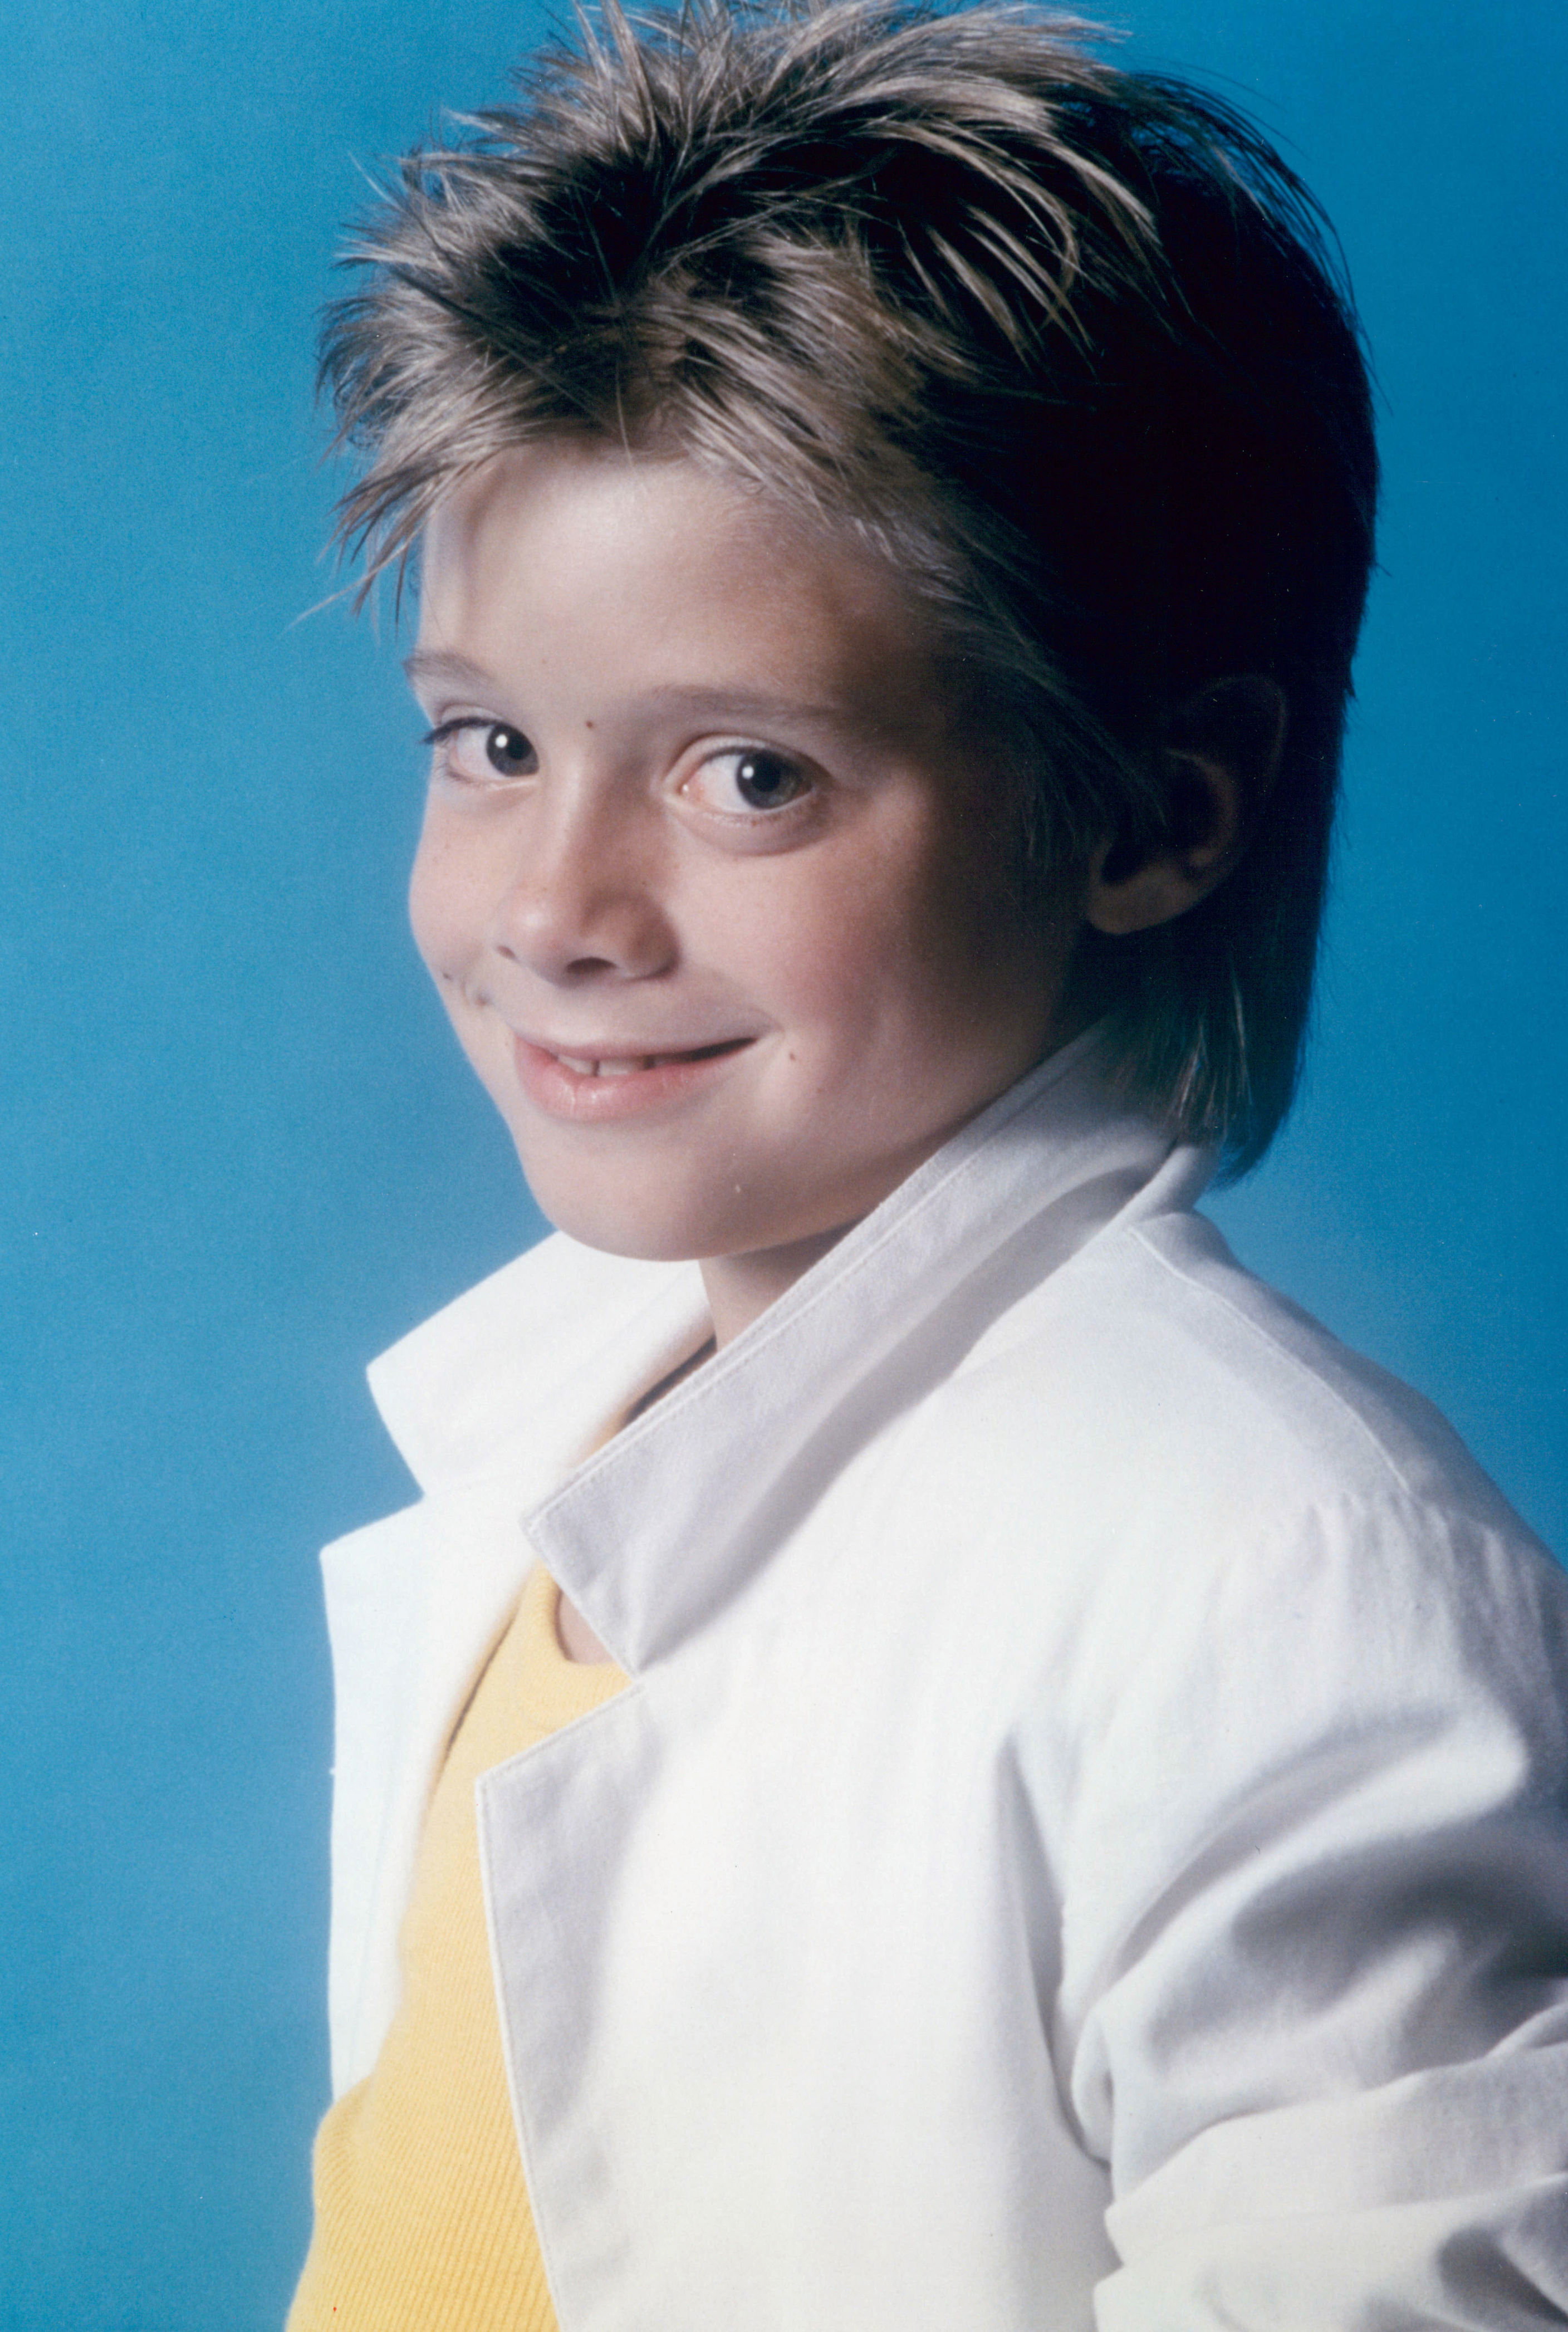 <p>Danny Pintauro originated the role of Paul Ryan on "As the World Turns" in 1982. He played Tad Trenton in "Cujo" the following year. But we'll always love him most for his role as adorable Jonathan Bower on "Who's the Boss?"</p>